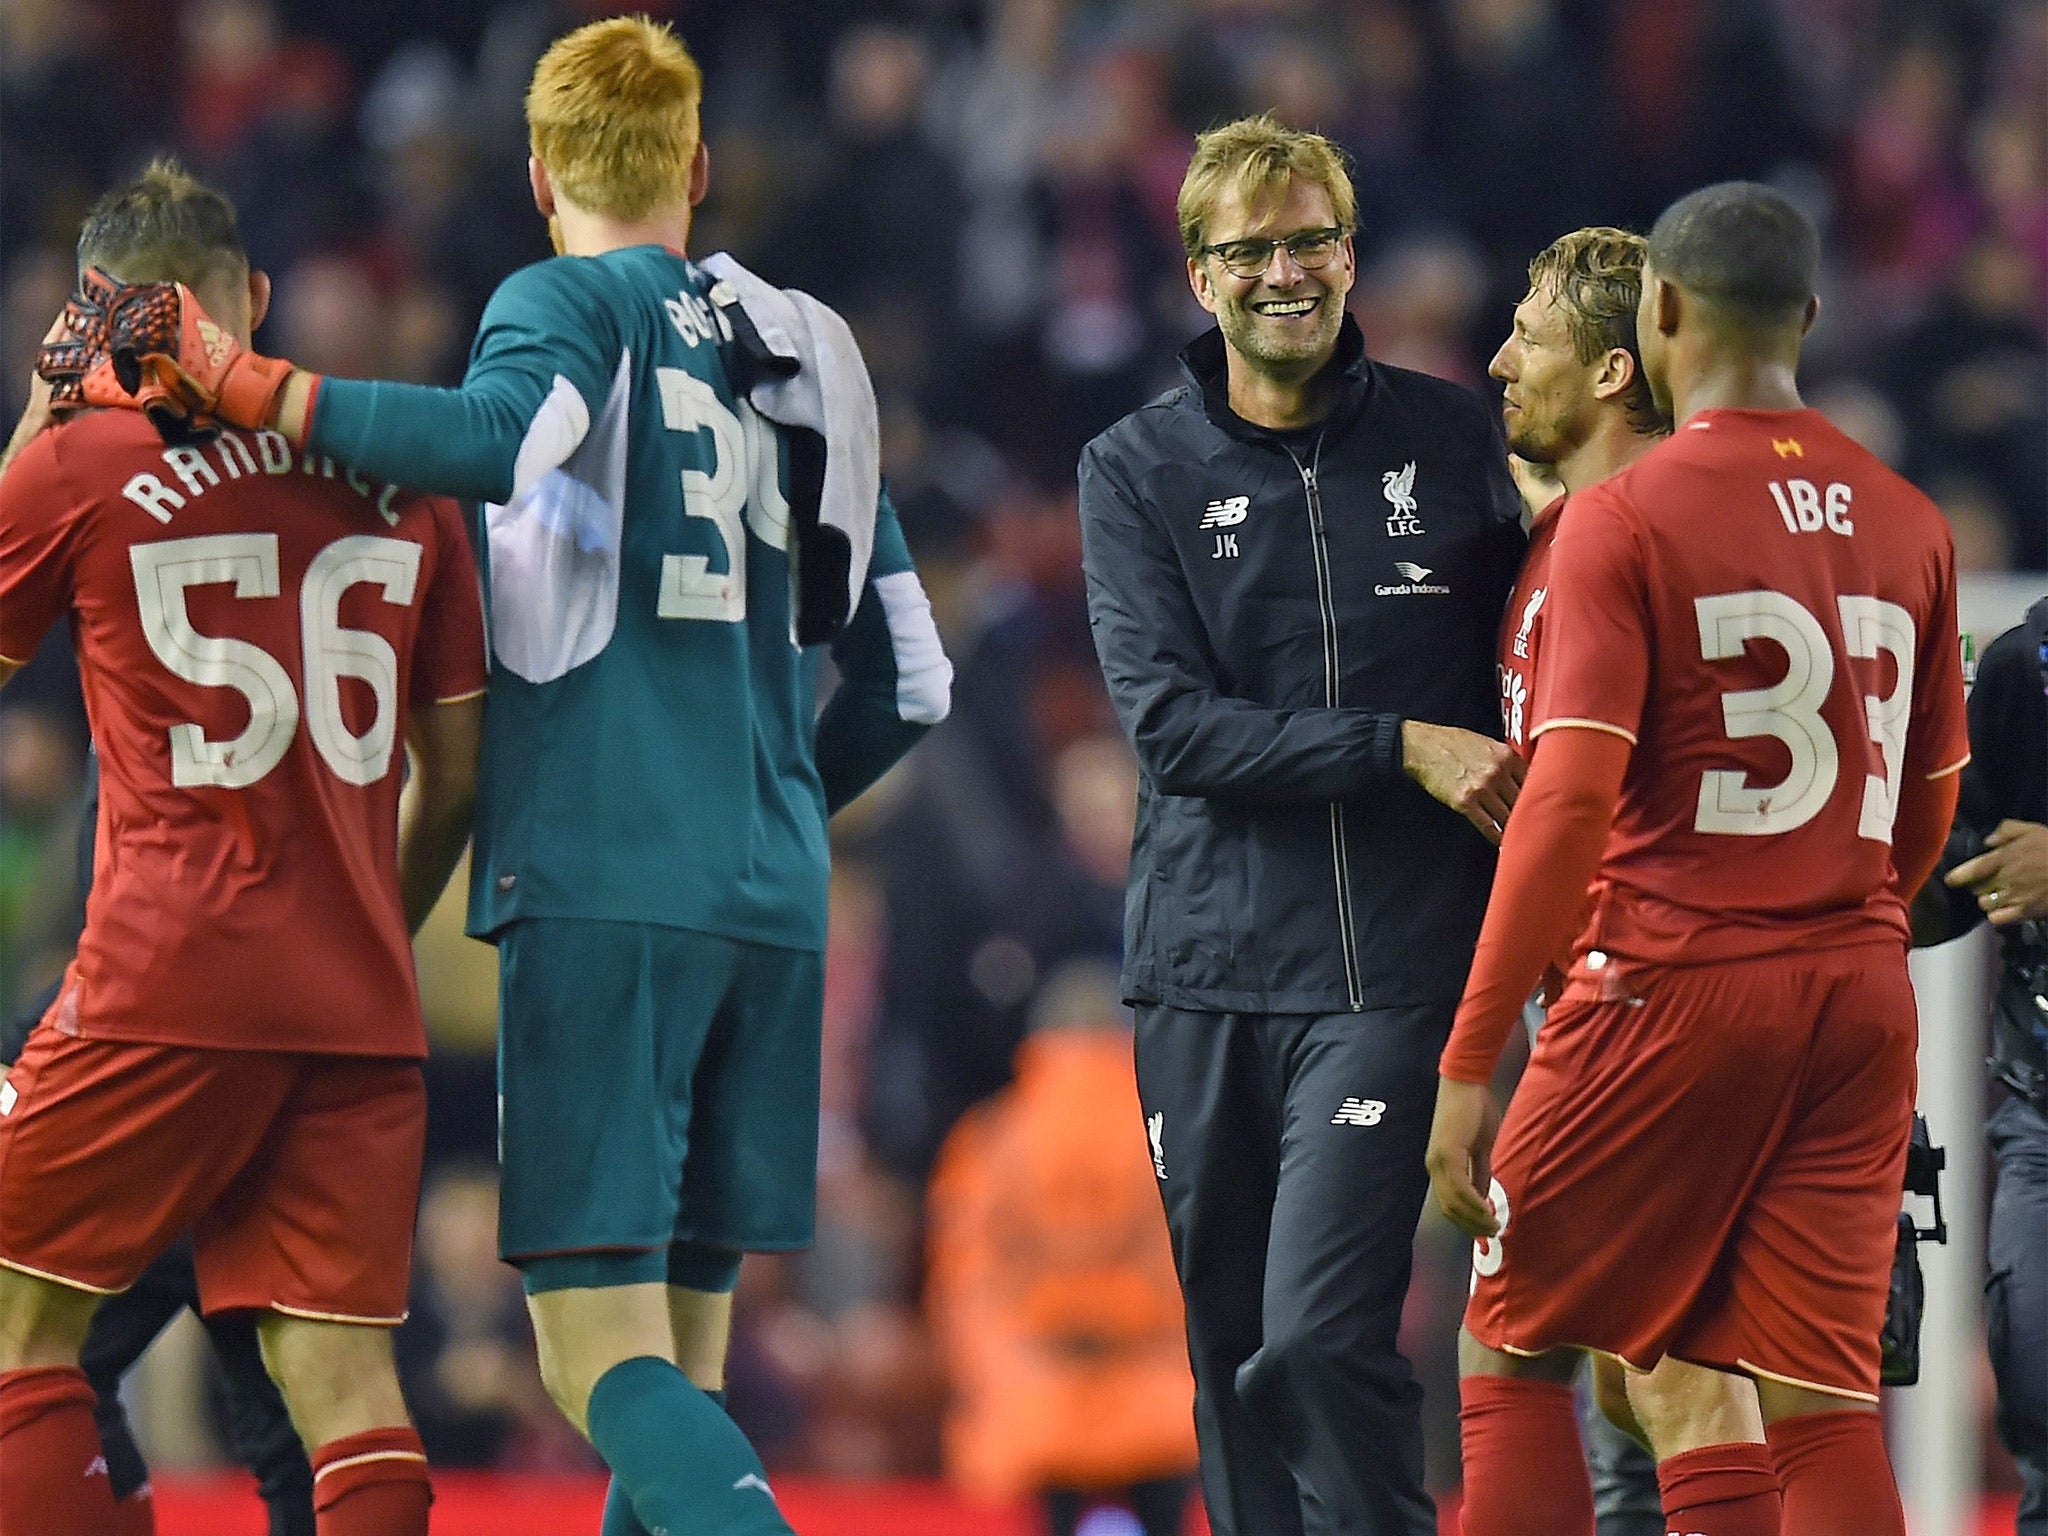 Jurgen Klopp congratulates his players following their victory - his first since taking over at Liverpool